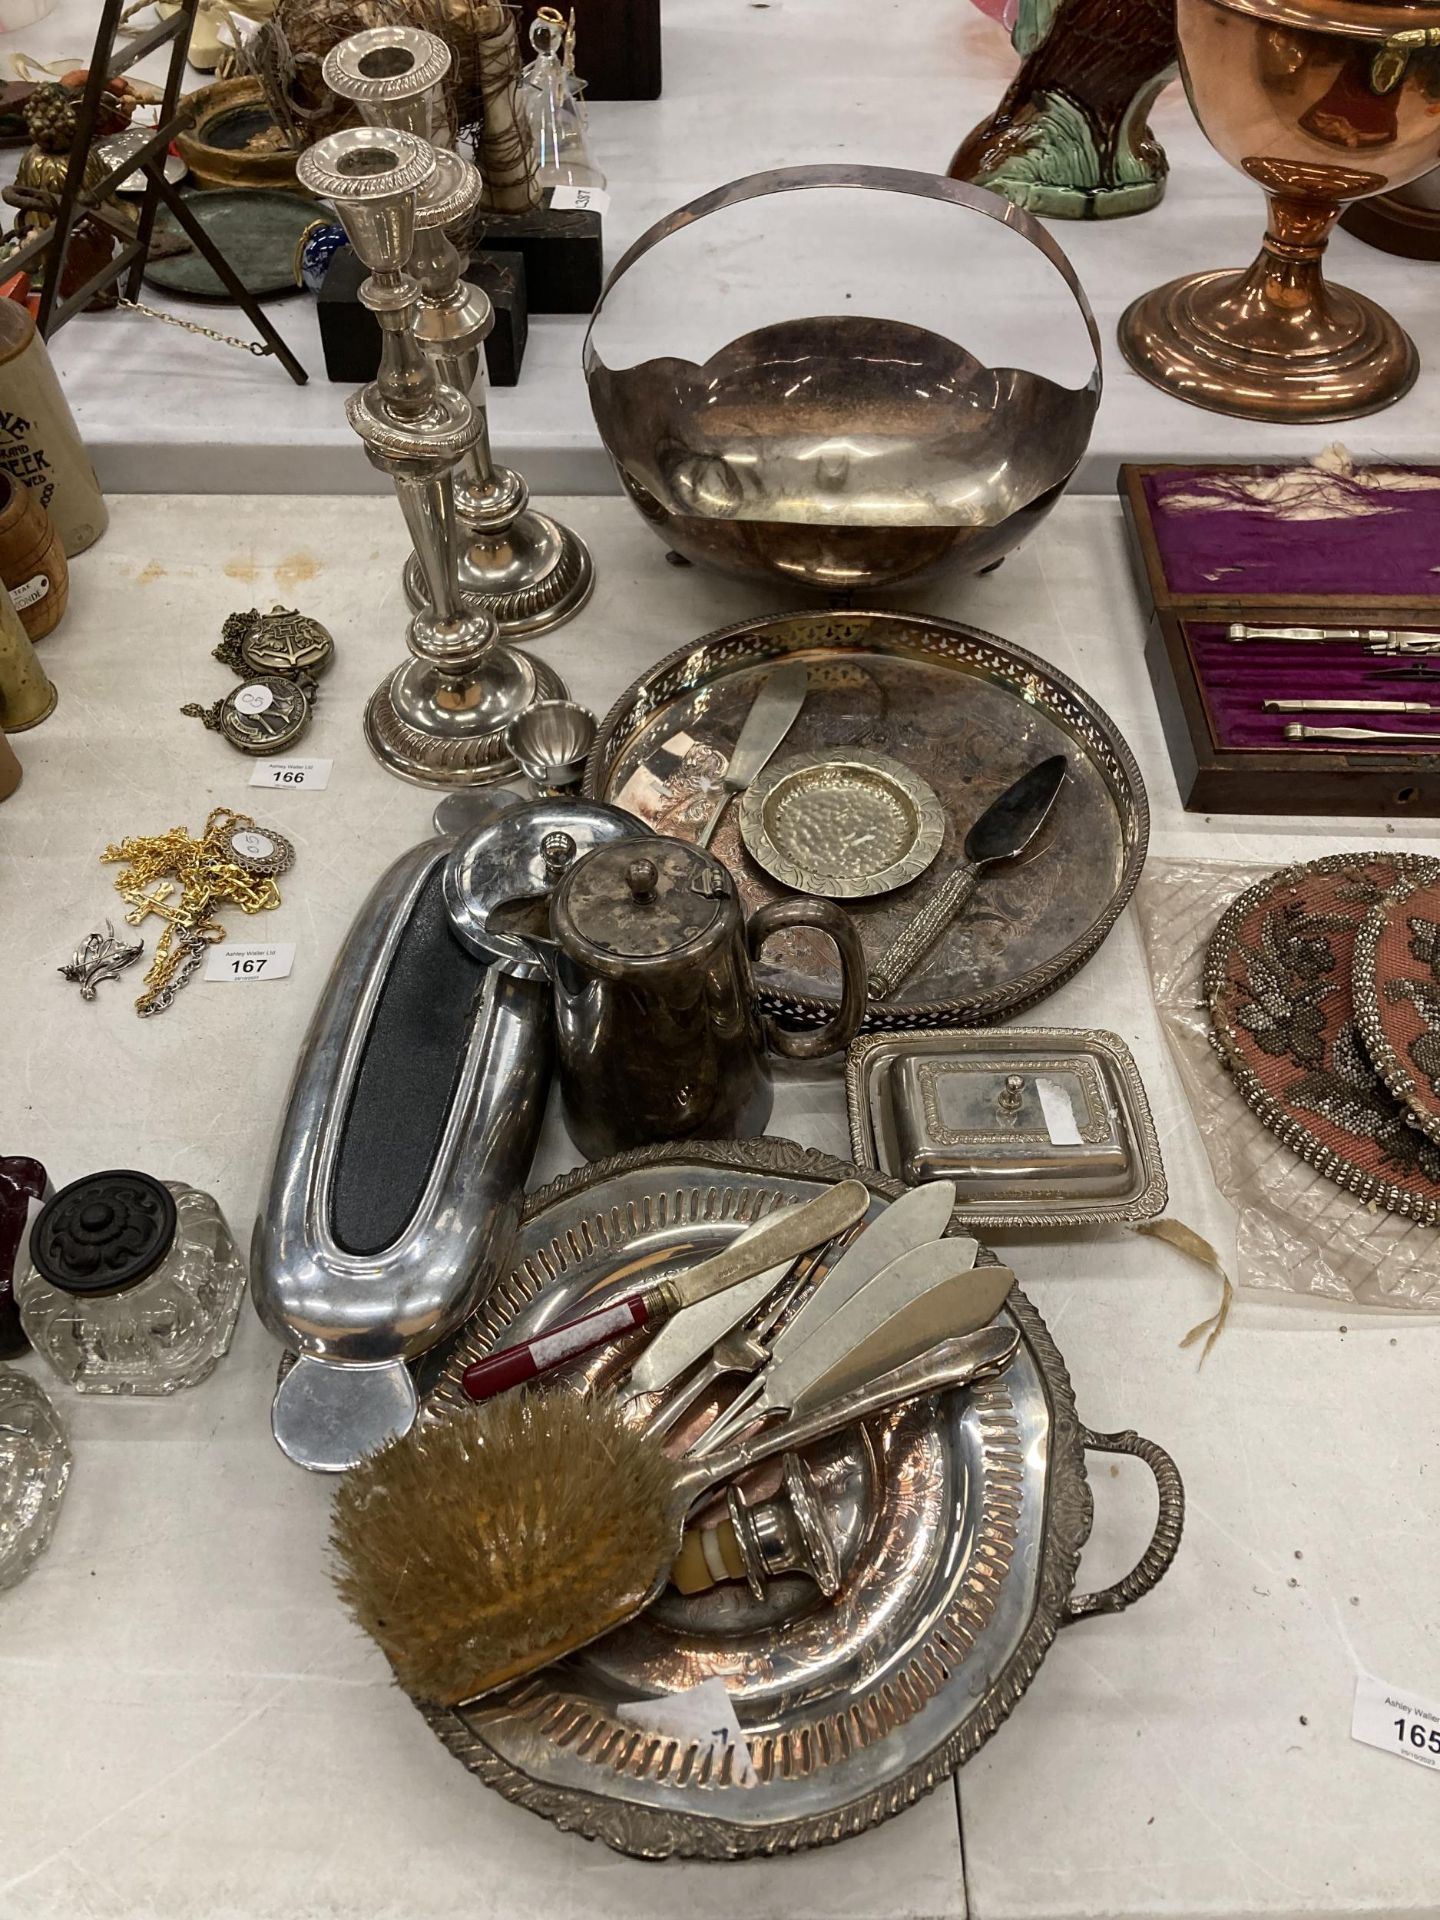 A LARGE QUANTITY OF VINTAGE SILVER PLATED ITEMS TO INCLUDE CANDLESTICKS, A GALLERIED TRAY, LARGE